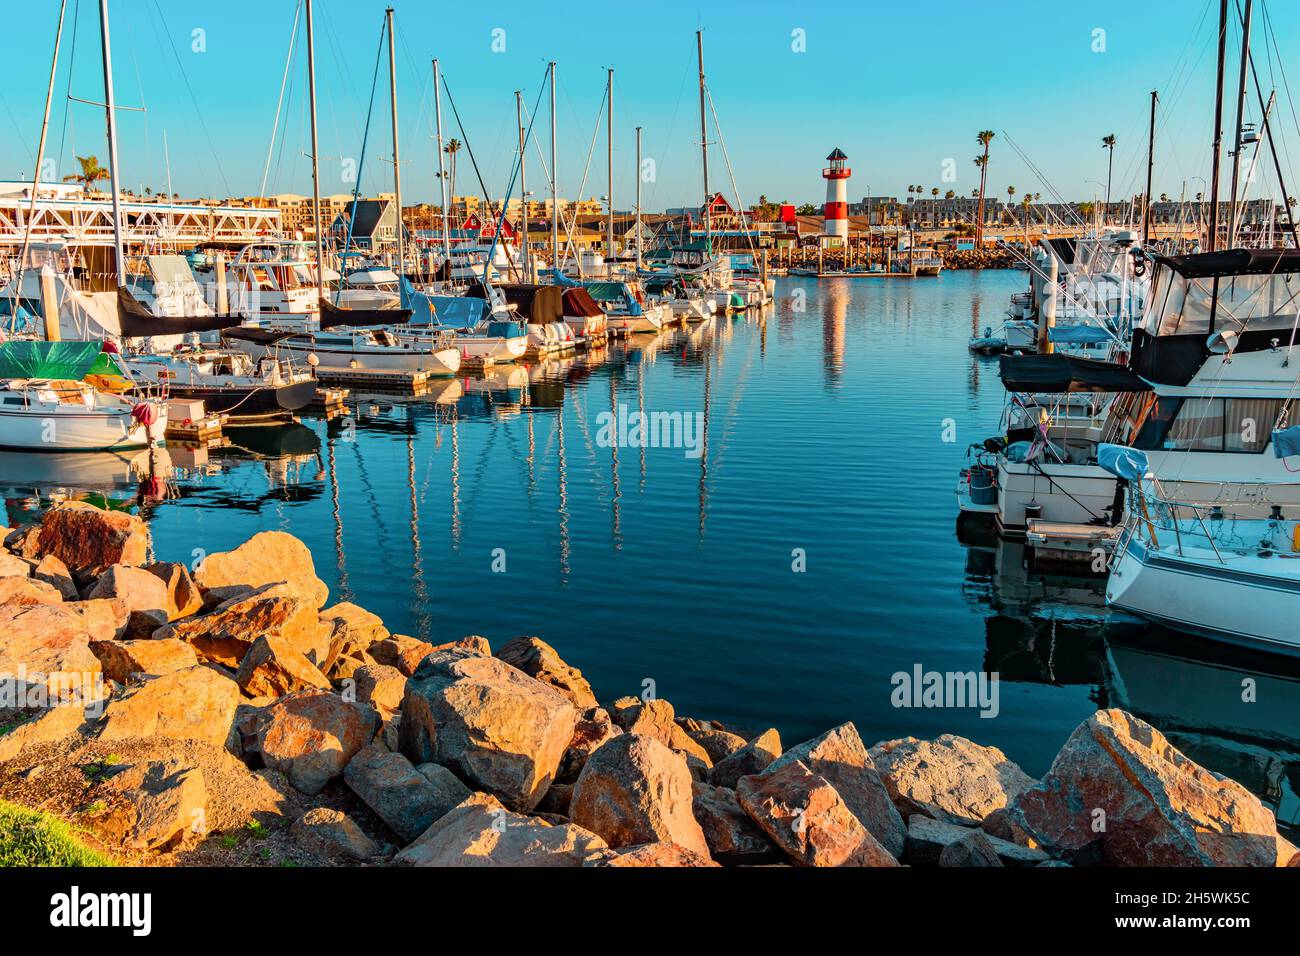 Oceanside Harbor is a  dramatic public harbor With Fishing Boats And Lighthouse. It is surrounded by small shops and is located next to Carlsbad, Cali Stock Photo